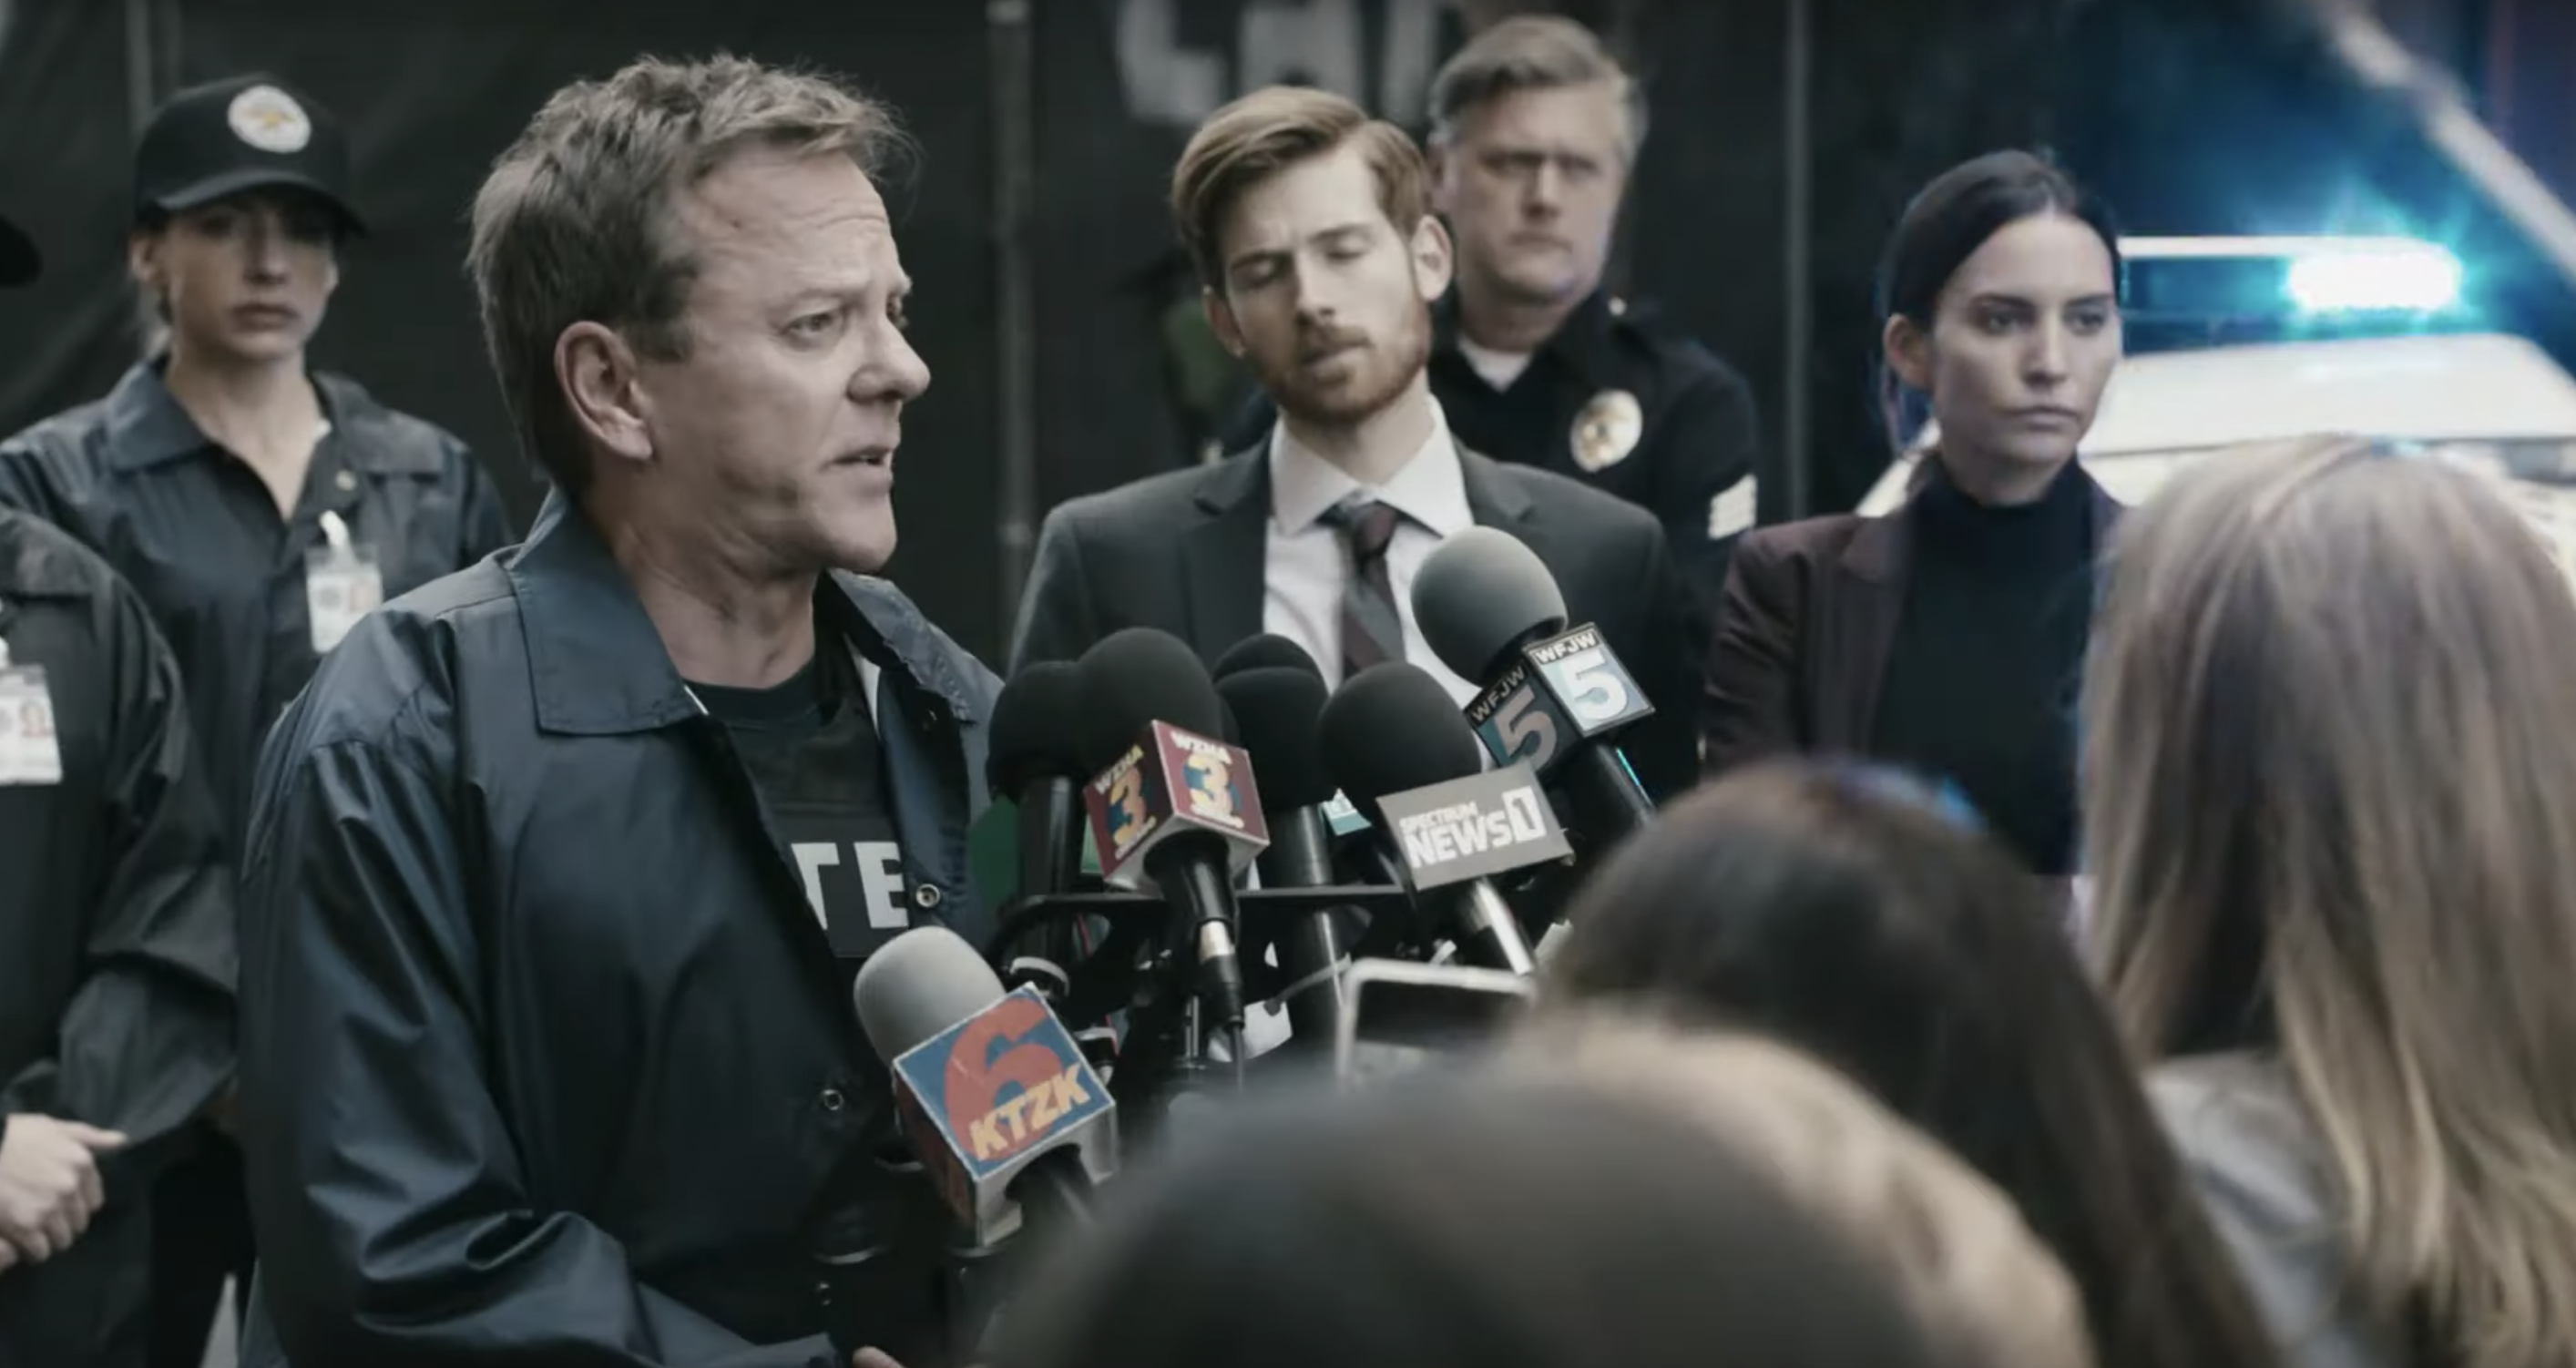 The Fugitive Is Back On The Run In New Teaser Trailer For Quibi Series